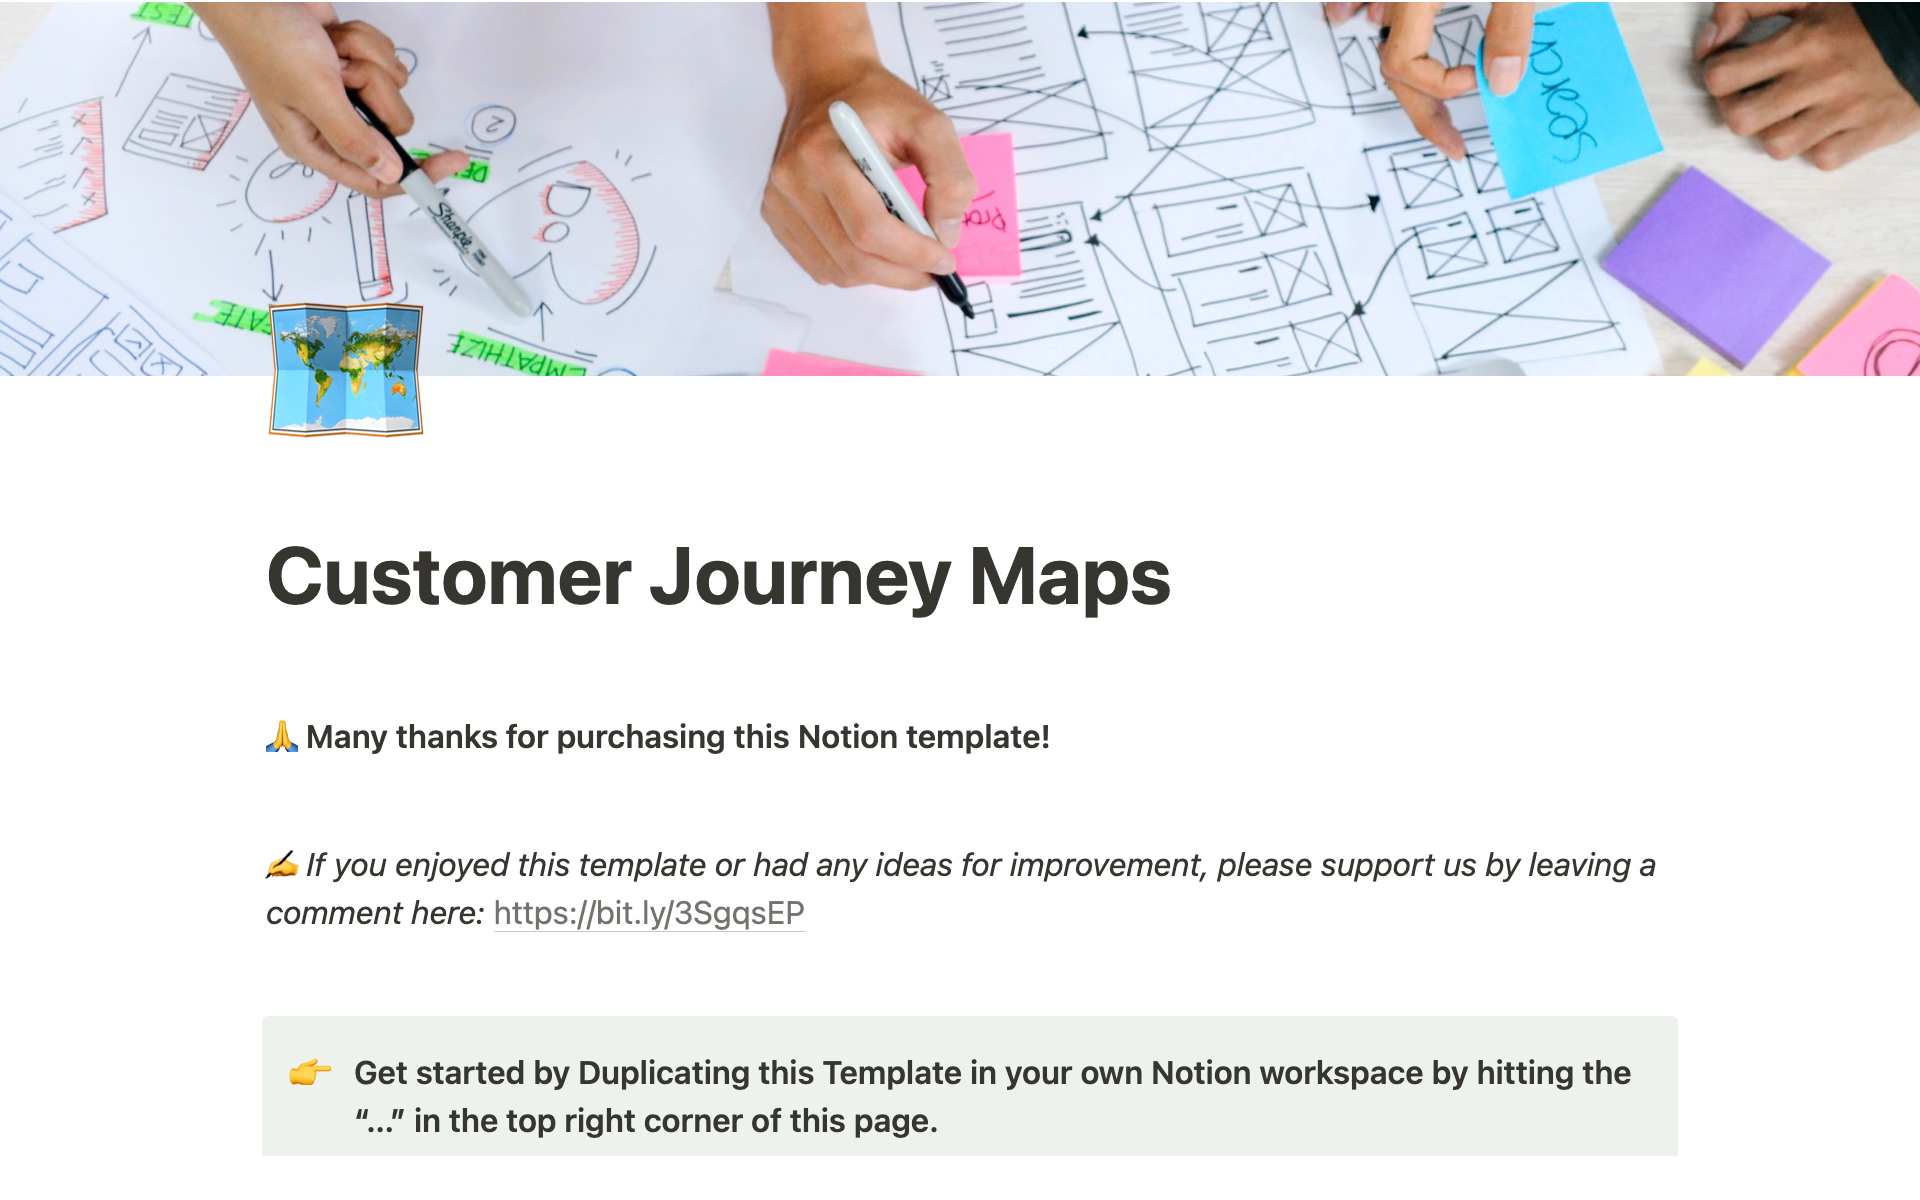 Enable individuals or teams to map their product or services customer journey with supporting resources on UX.